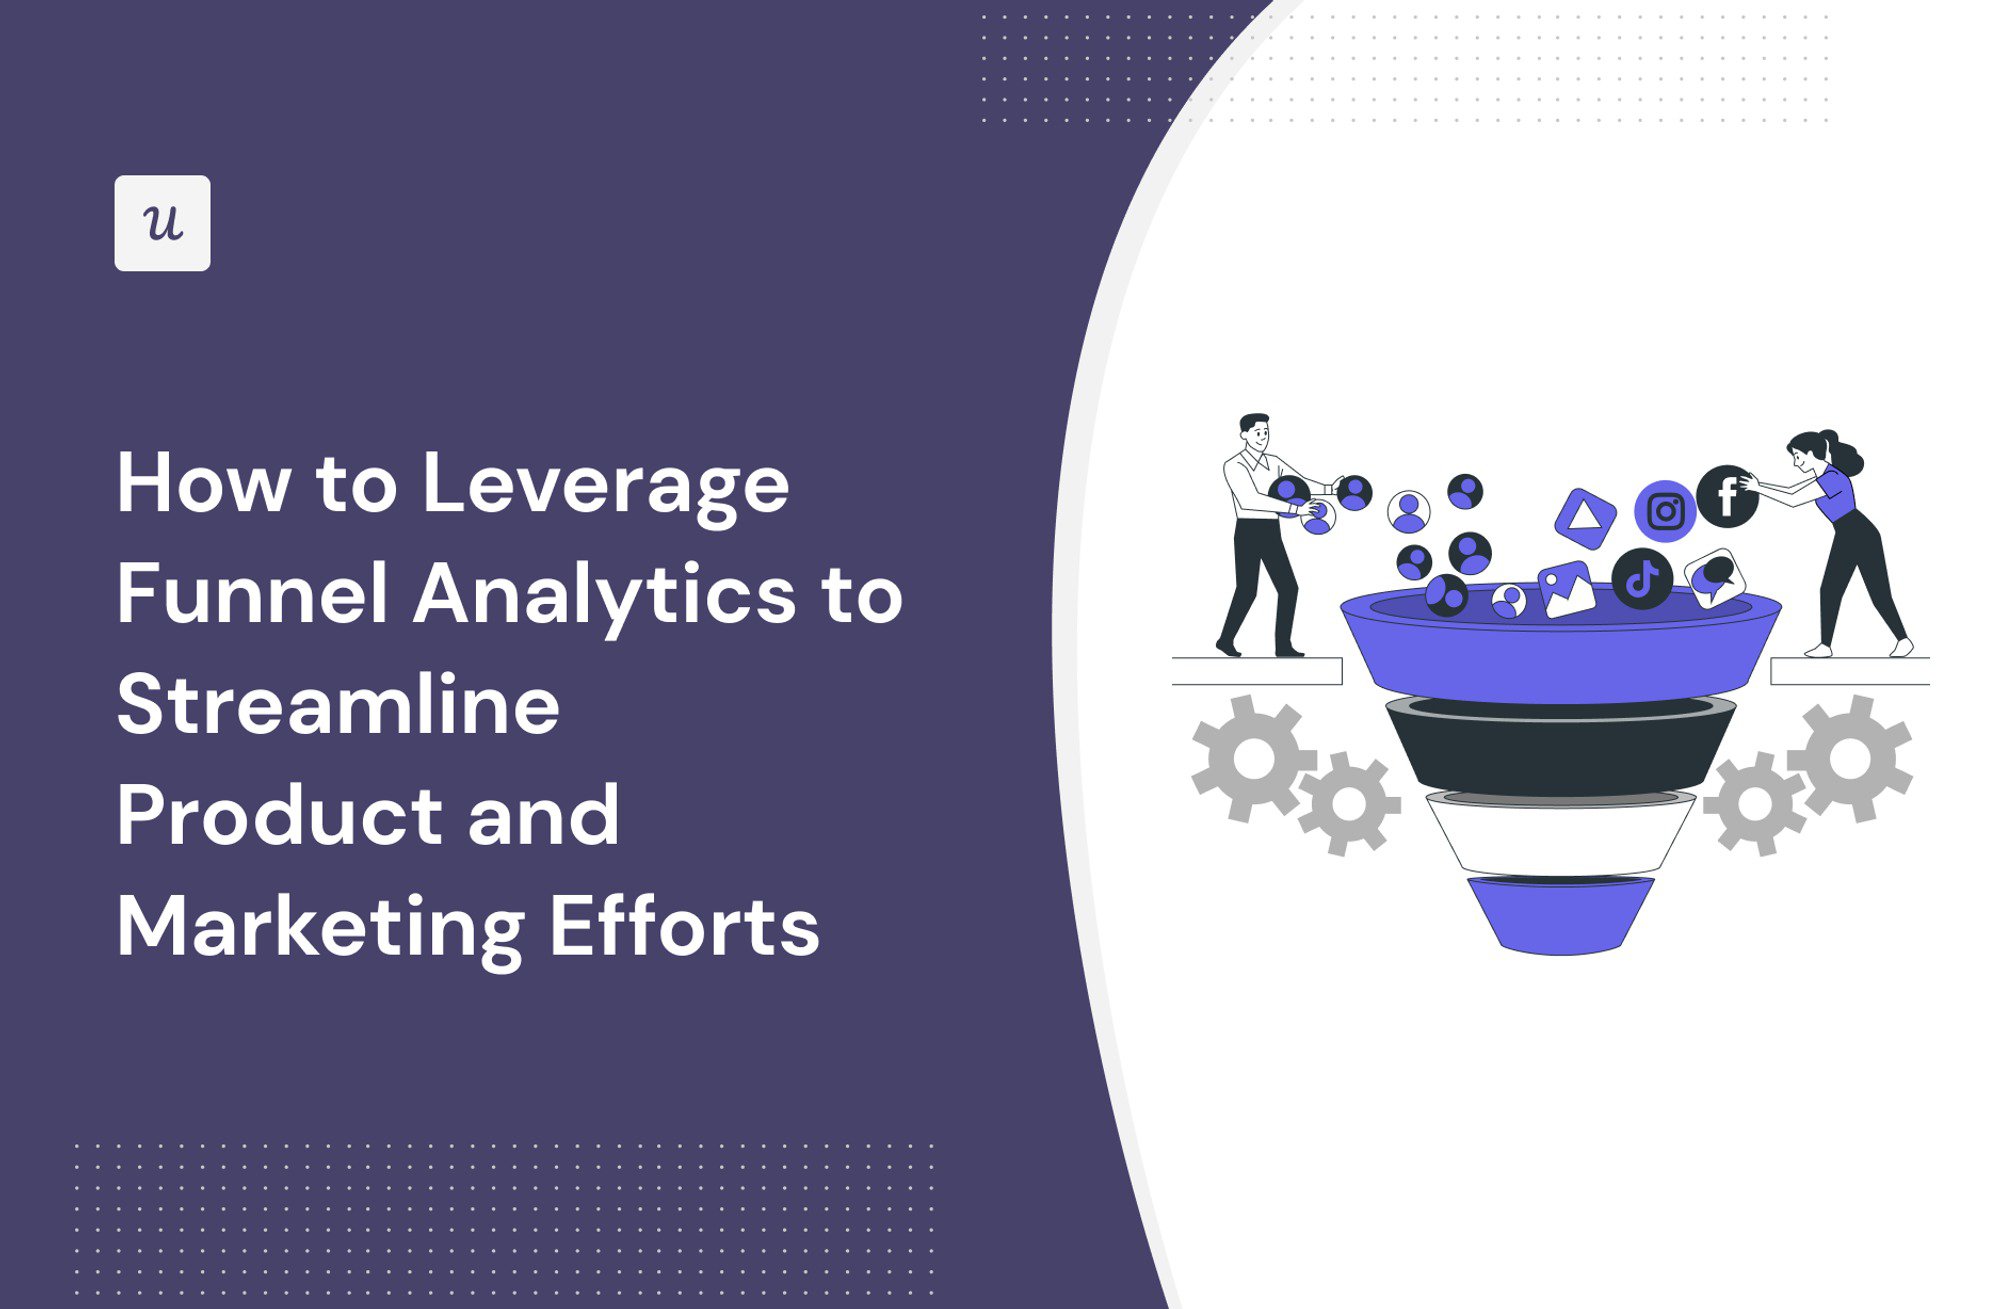 How to Leverage Funnel Analytics to Streamline Product and Marketing Efforts cover